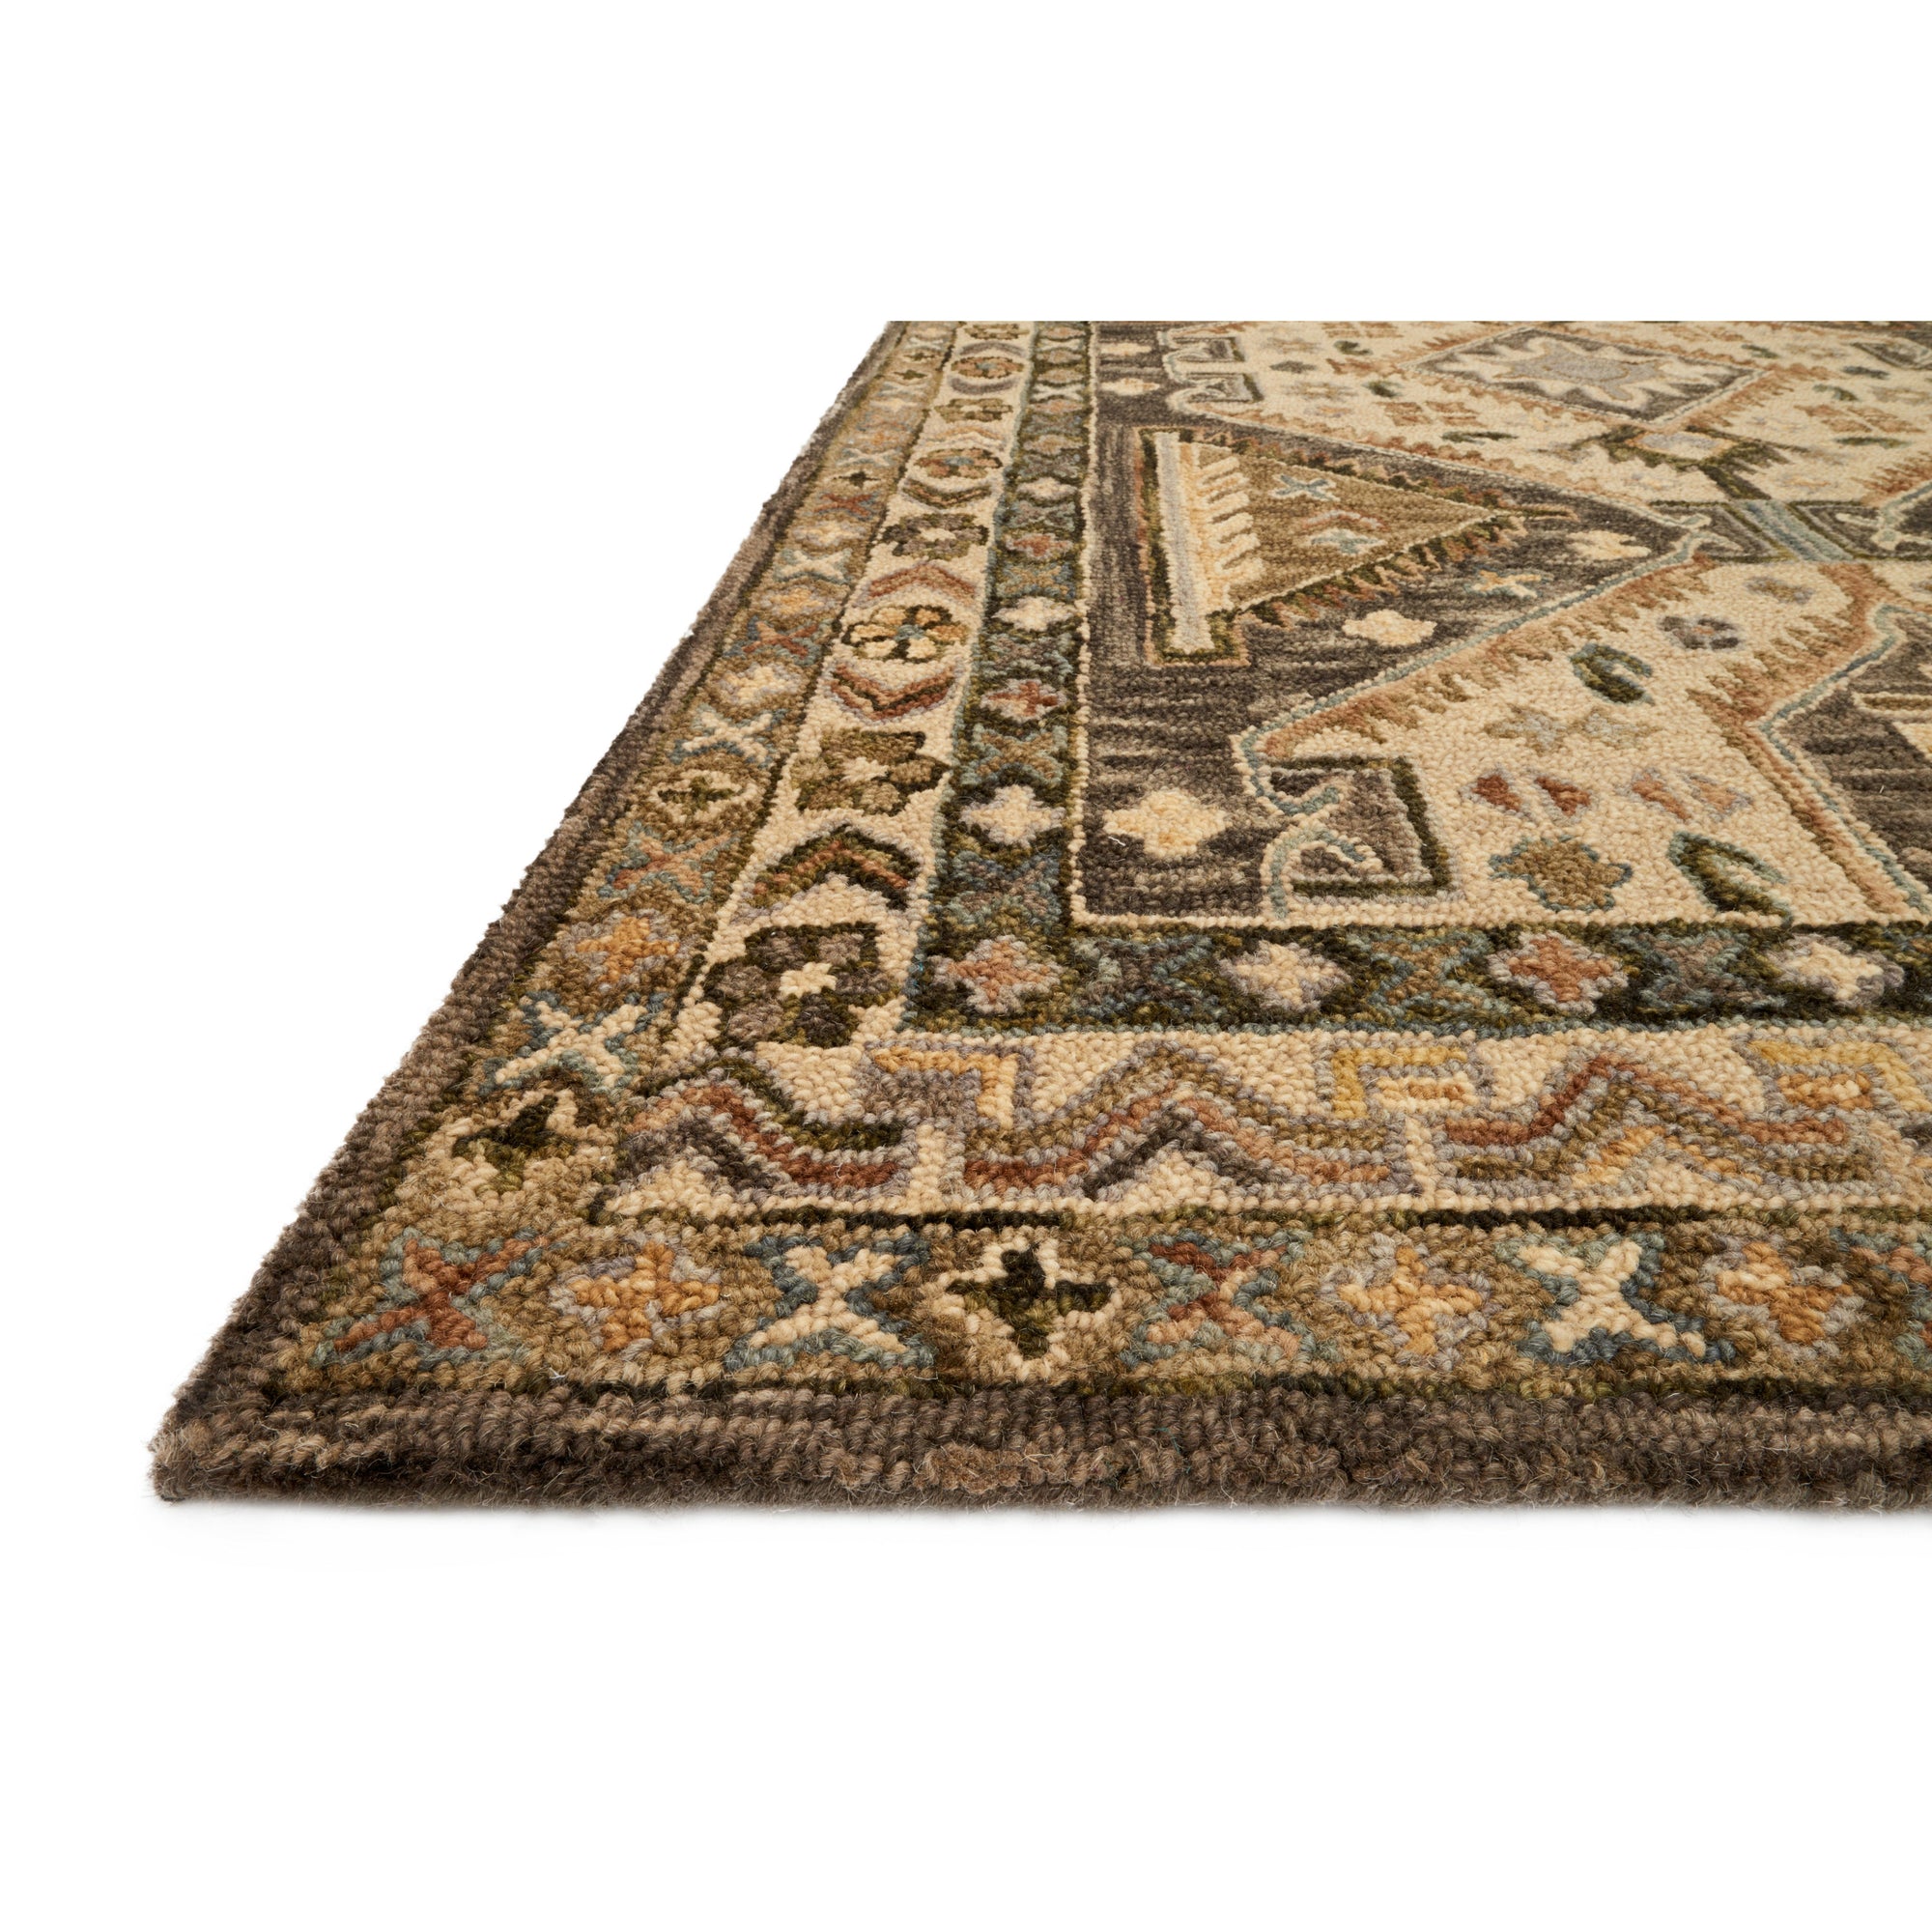 Rugs by Roo Loloi Victoria Walnut Beige Area Rug in size 18" x 18" Sample